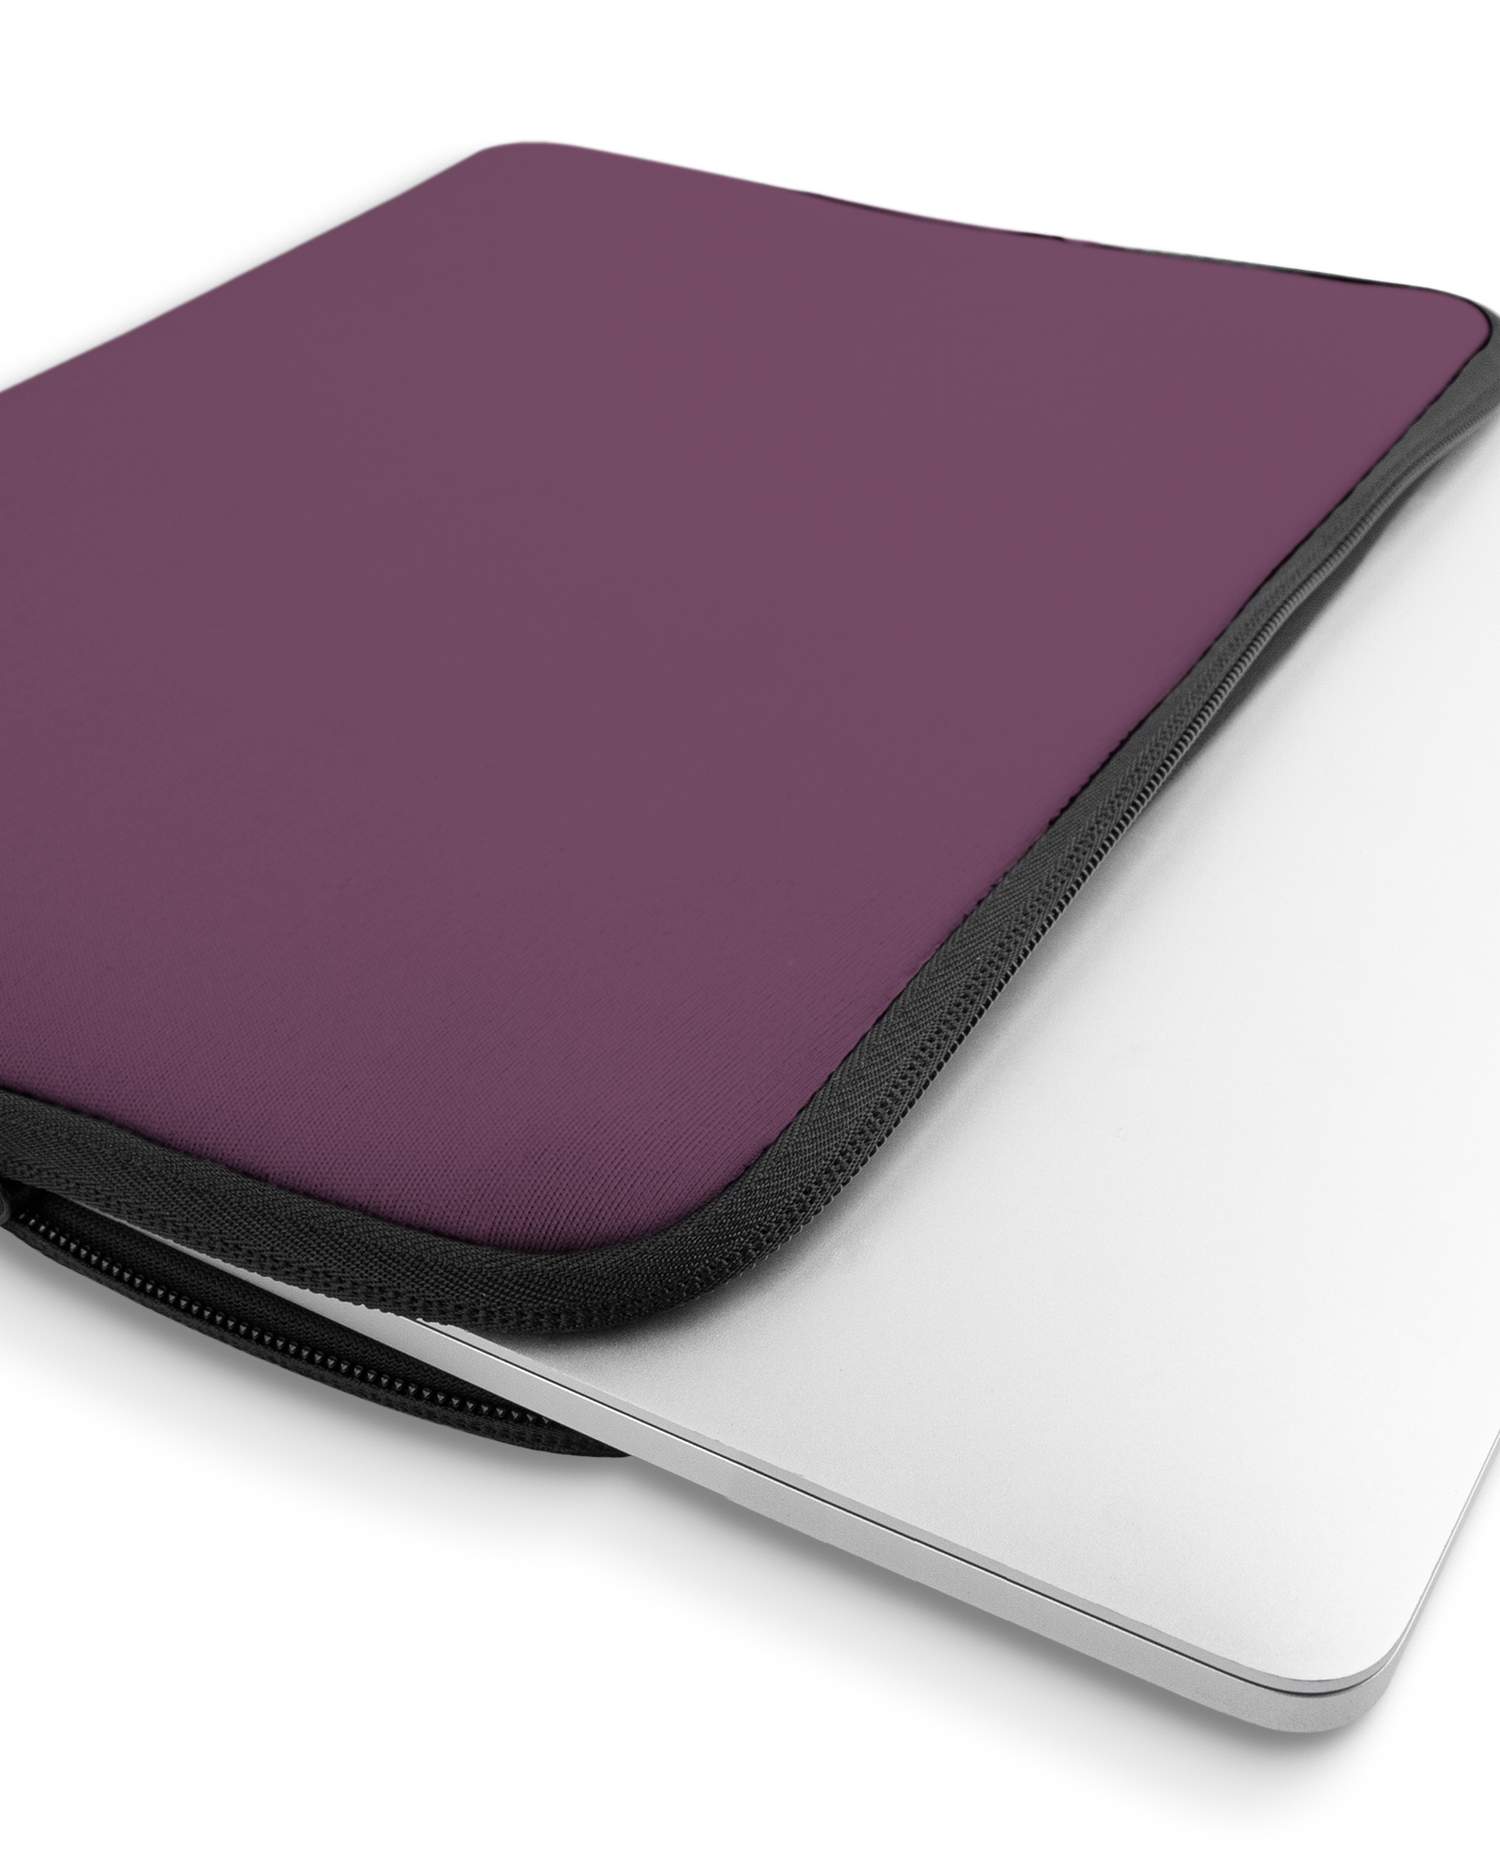 PLUM Laptop Case 16 inch with device inside